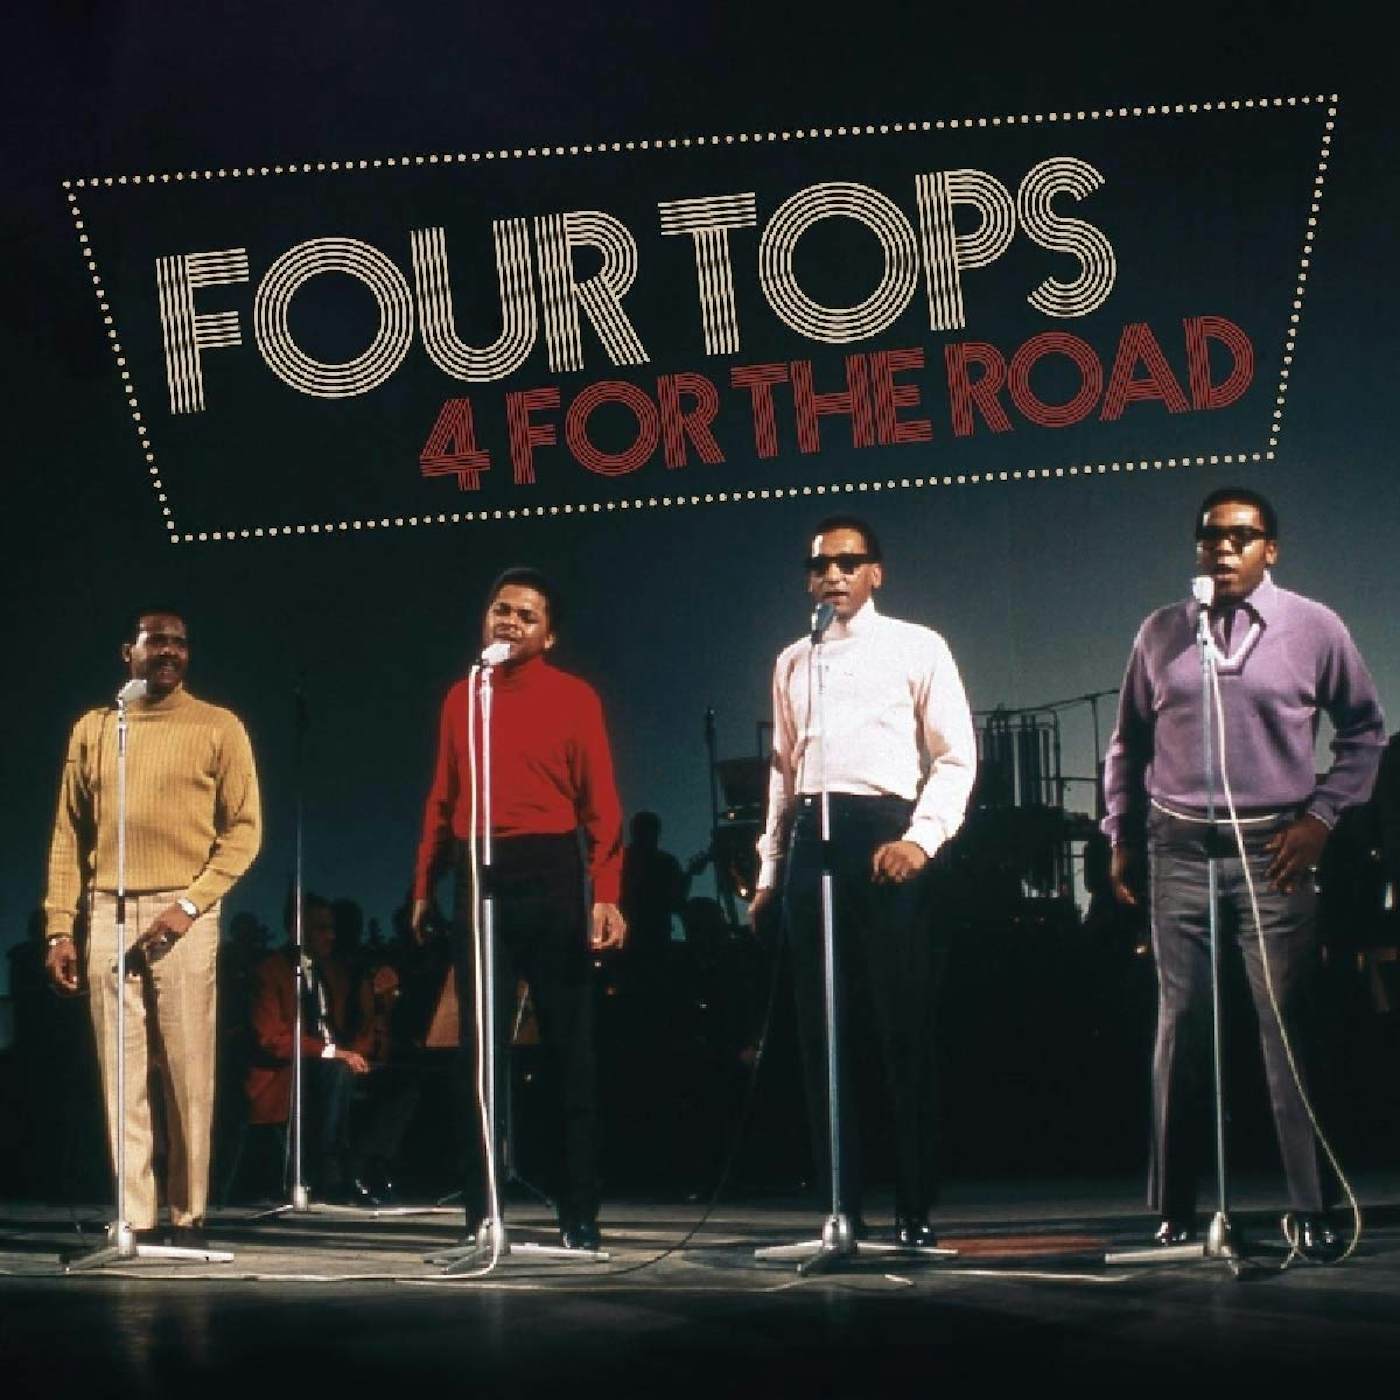 Four Tops 4 FOR THE ROAD CD